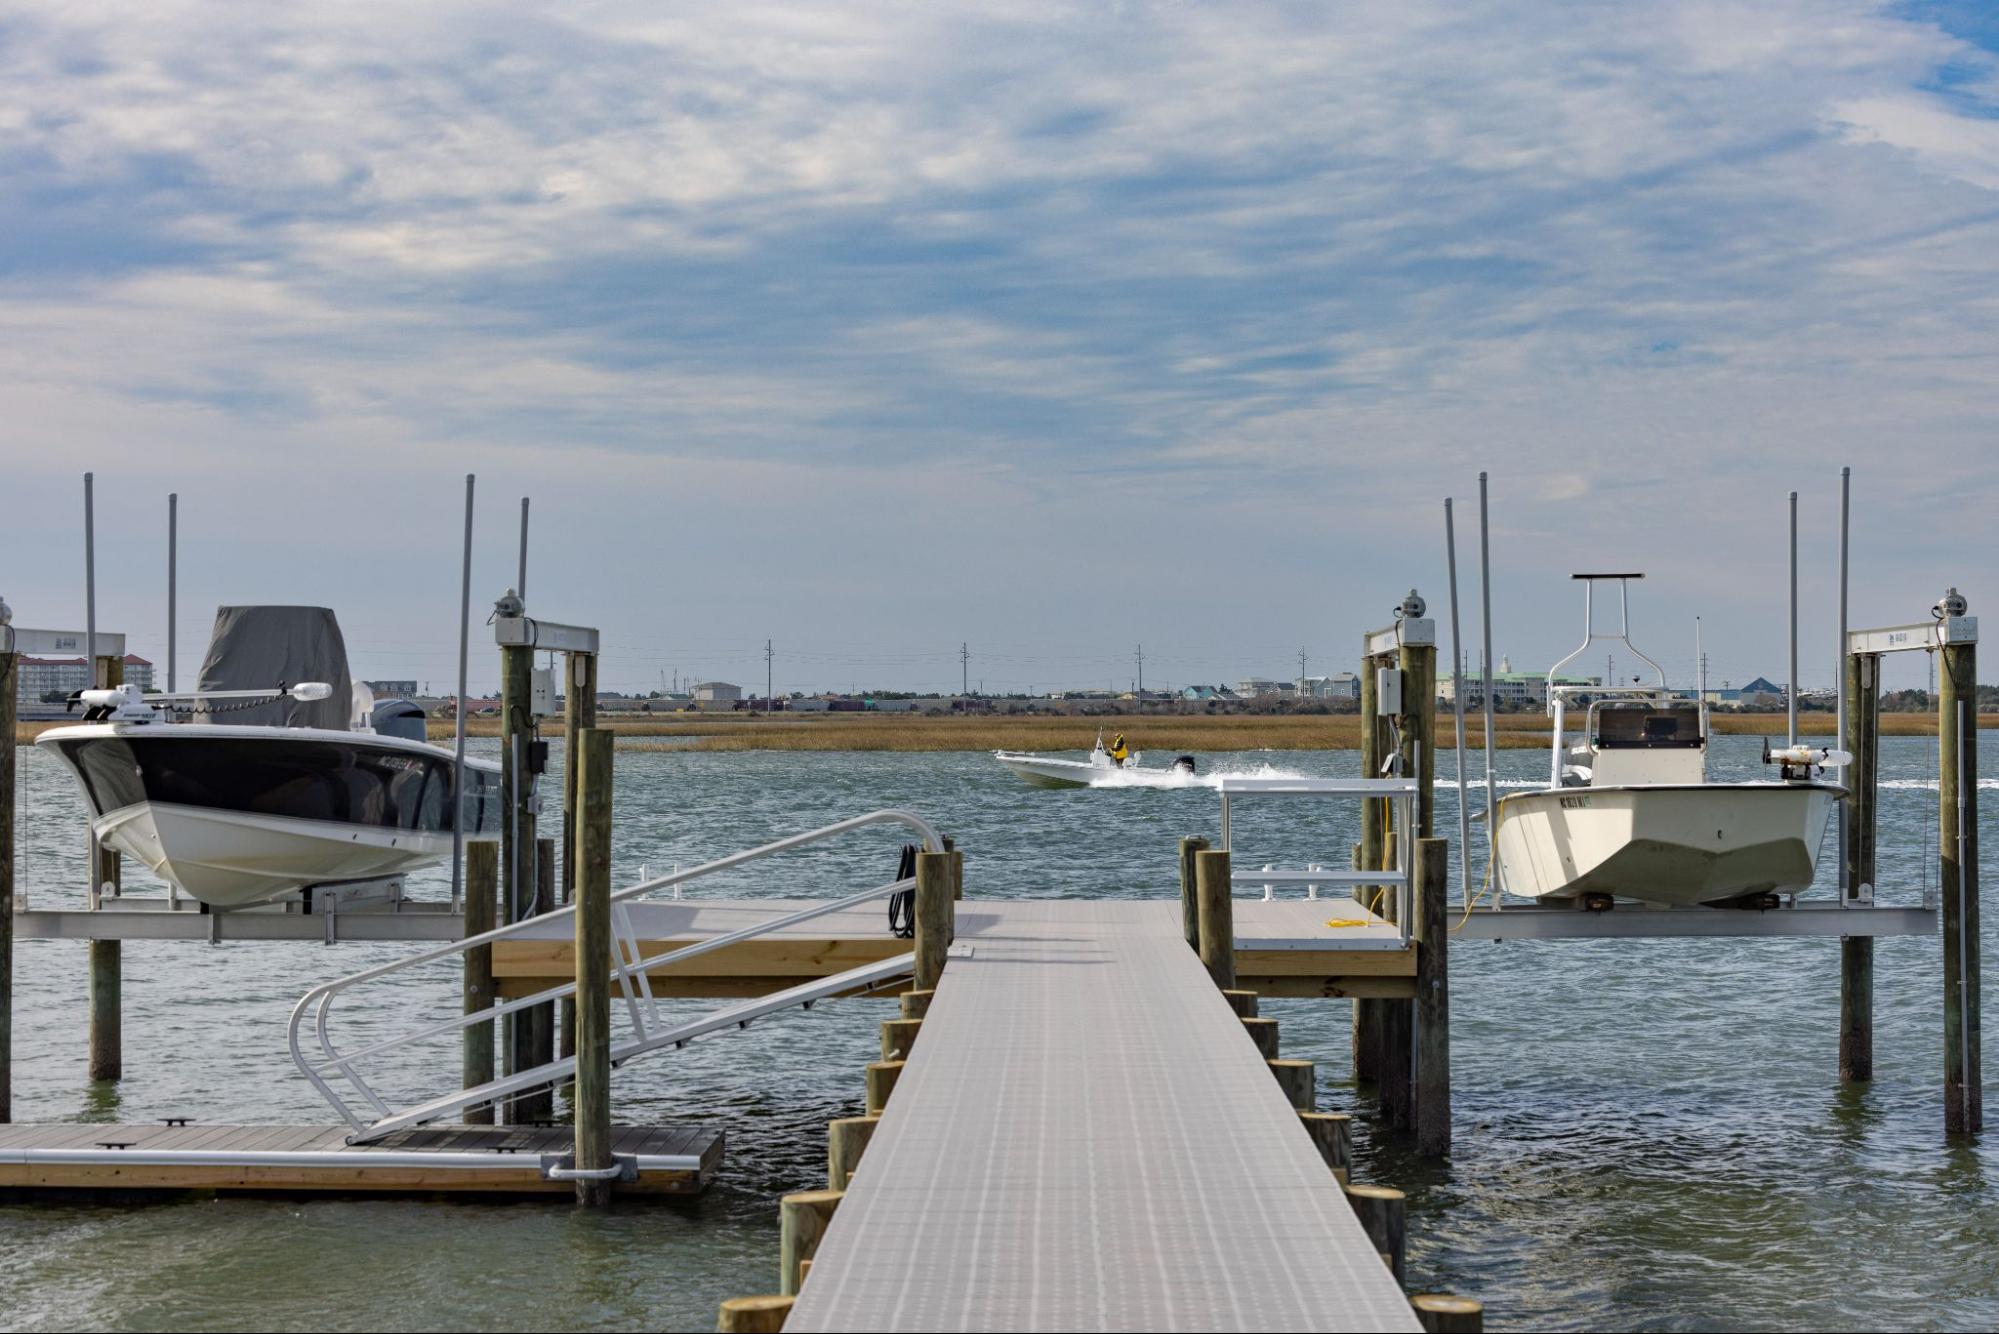 The photo depicts a T-shaped dock with two boats lifted by a boat lift on each side. The boat on the left-hand side is larger than the boat on the right-hand side. 